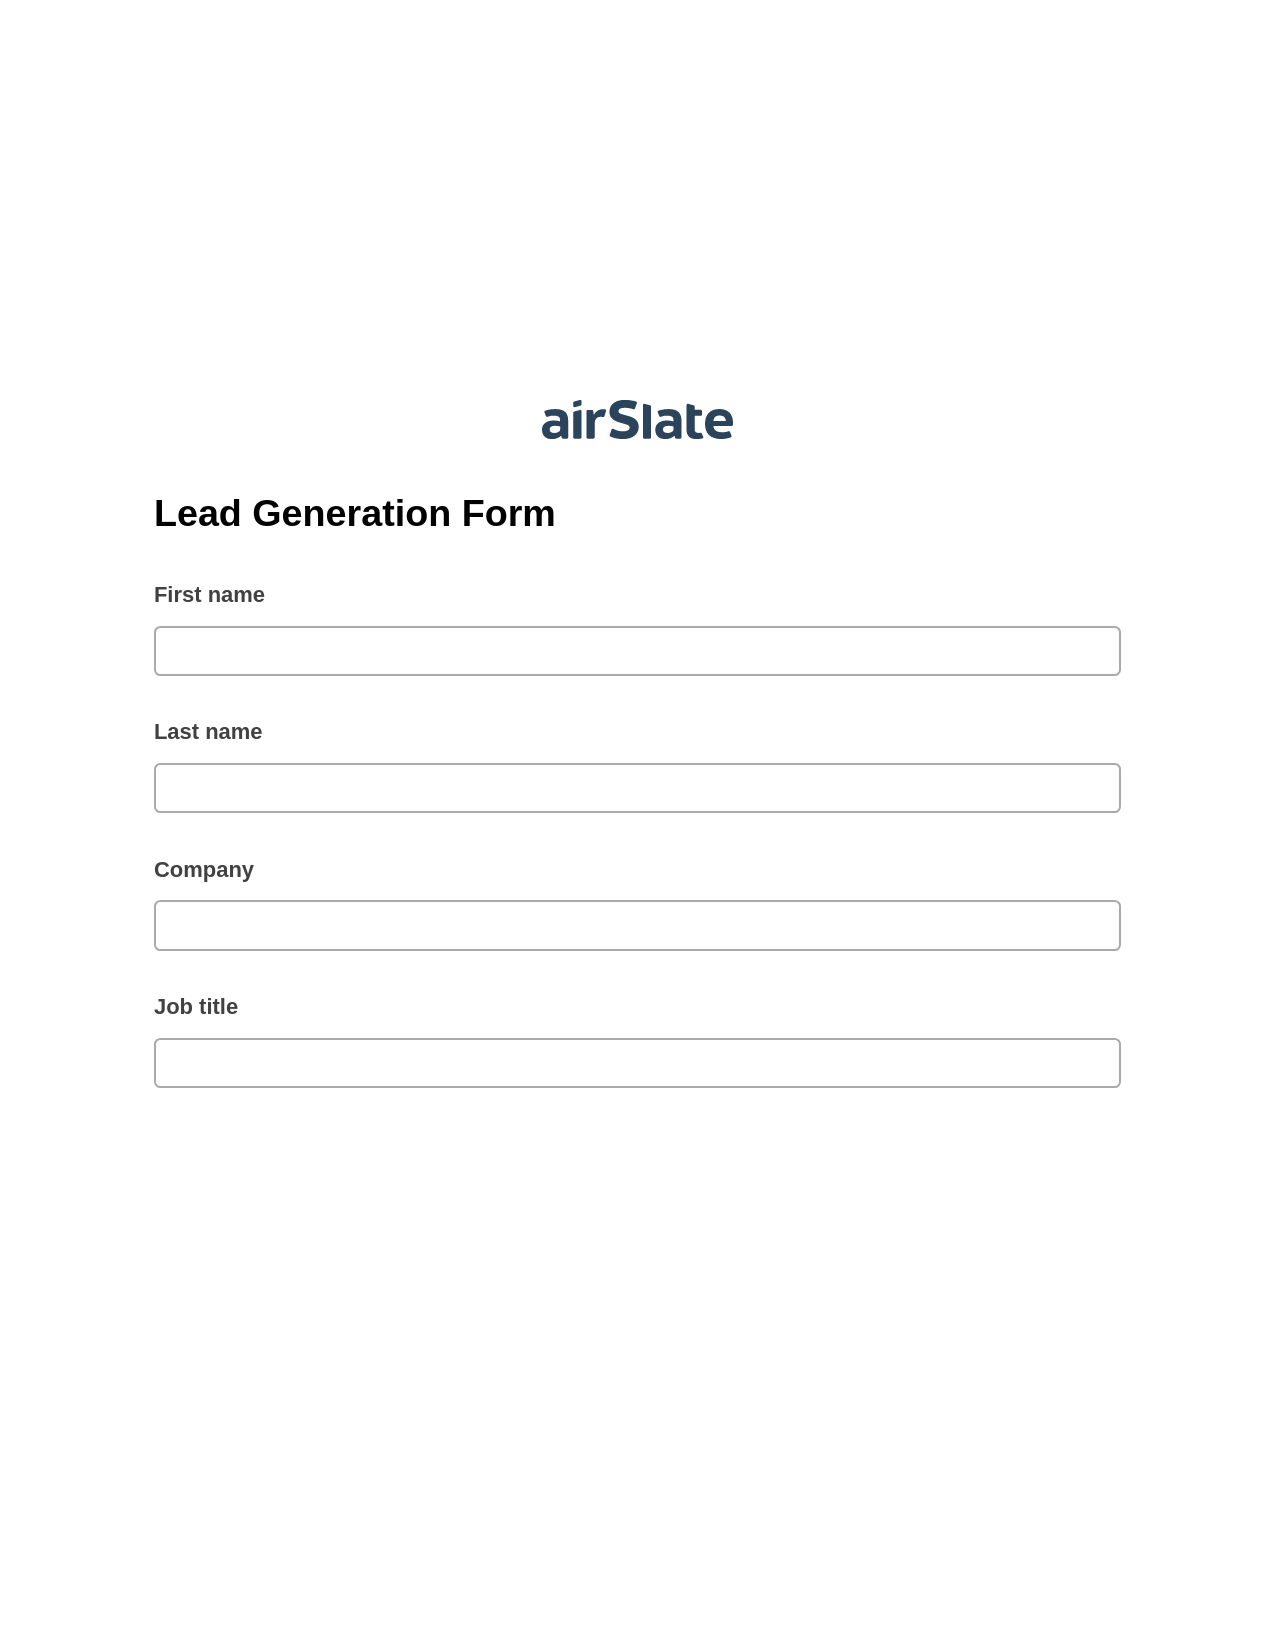 Lead Generation Form Pre-fill from MySQL Bot, Send a Slate with Roles Bot, Export to Excel 365 Bot